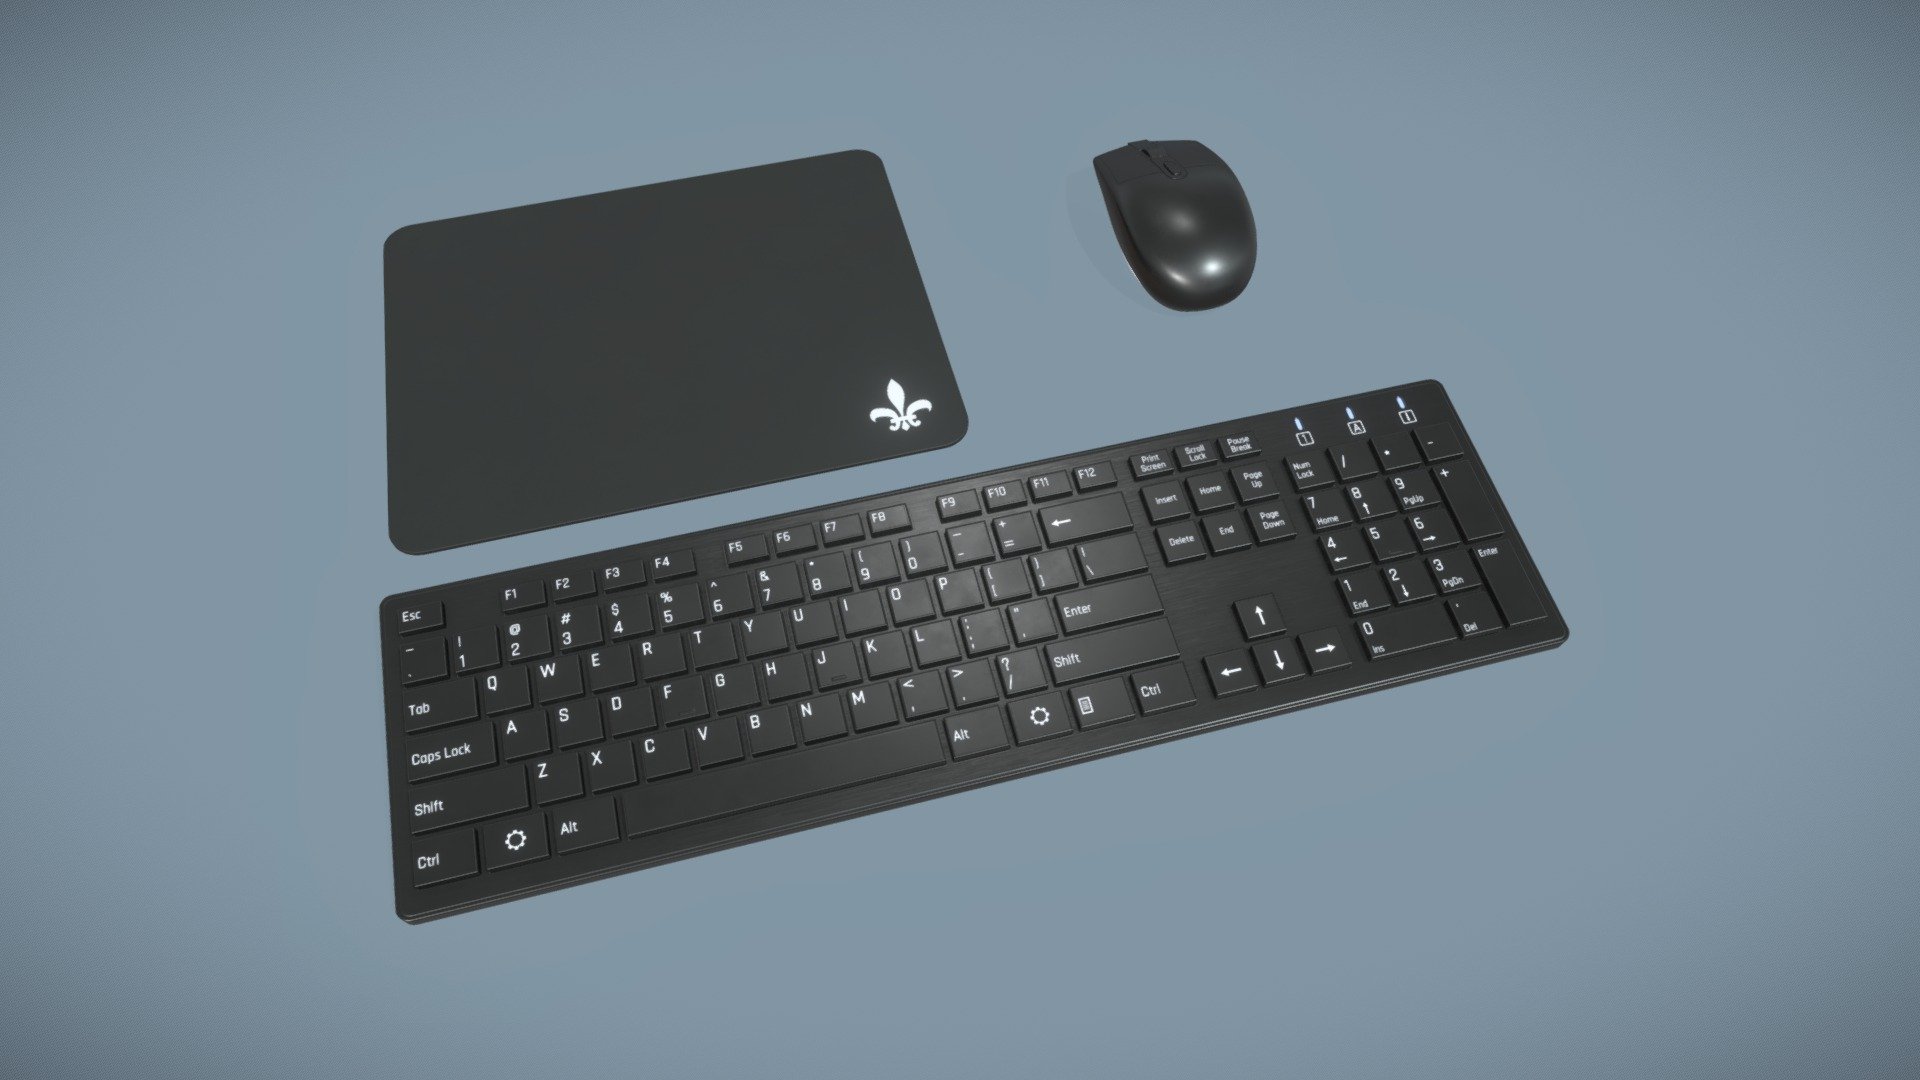 Game ready low-poly Computer Mouse and Keyboard models with PBR textures for game engines/renderers.

This product is intended for game/real time/background use. This model is not intended for subdivision.

Features:




Geometry is triangulated to ensure best shading

All materials and objects named appropriately

Scaled to approximate real world size

Polycount: 4579 tris, 2705 vertices

No special plugins needed

.obj and .fbx versions exported from Blender 2.83

Textures:




Texture resolution: 4096x4096

Texture formats: PNG

General PBR Metallic/Roughness  textures: BaseColor, Metallic, Roughness, Normal(DirectX), Normal(OpenGL), AO, Emission

Unity textures: Albedo, MetallicSmoothness, Normal(OpenGL), AO, Emission

Unreal Engine 4 textures: BaseColor, OcclusionRoughnessMetallic, Normal(DirectX), Emission

PBR Specular/Glossiness textures: Diffuse, Specular, Glossiness, Normal(DirectX), Normal(OpenGL), AO, Emission
 - Computer Mouse and Keyboard - Buy Royalty Free 3D model by AshMesh 3d model